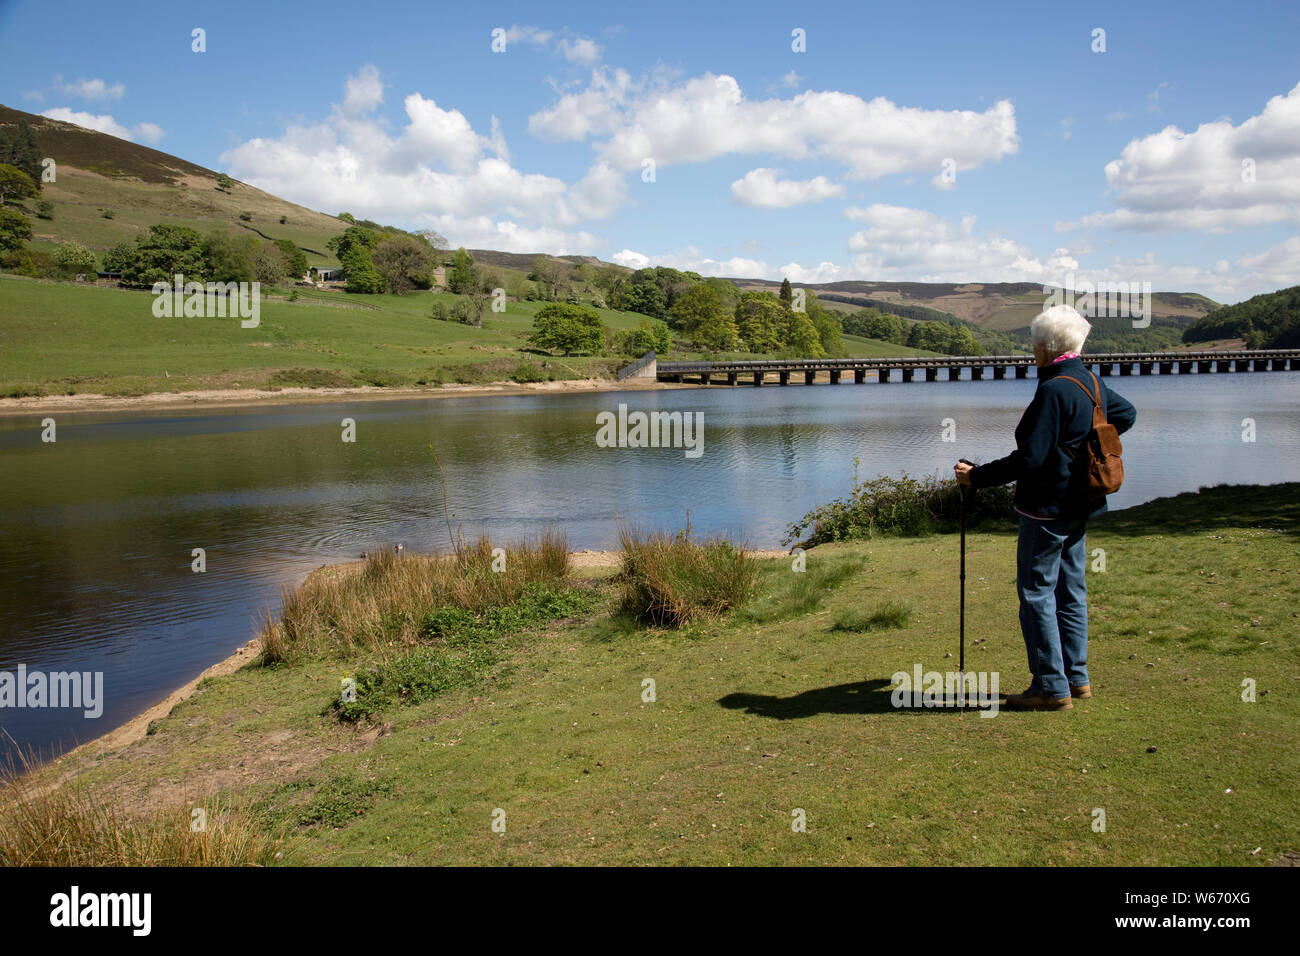 Woman walker enjoying view of Ladybower Reservoir, the largest (holding 6300 million gallons) of three water storage reservoirs in the Derwent Valley, Stock Photo